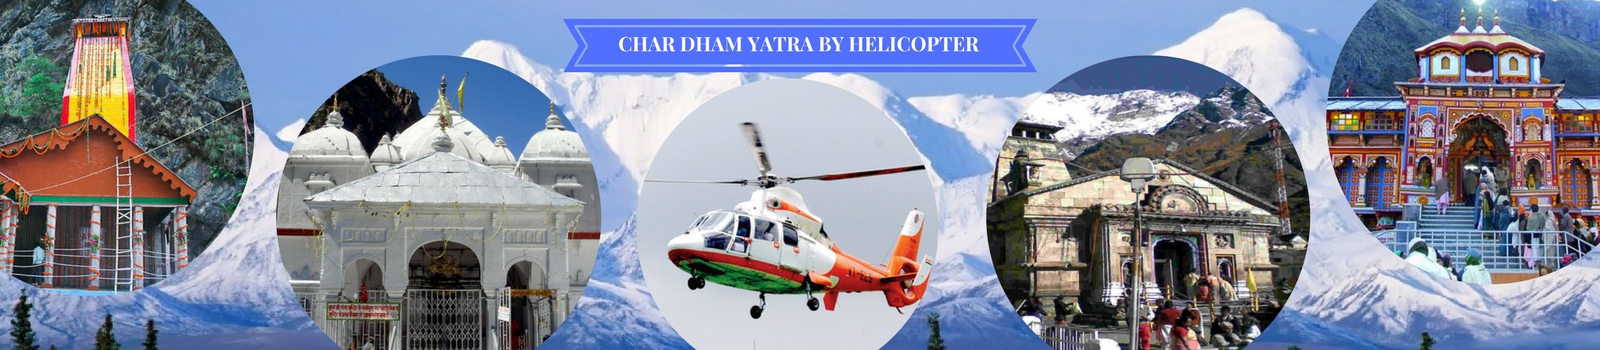 CHAR DHAM YATRA 2022 BY HELICOPTER